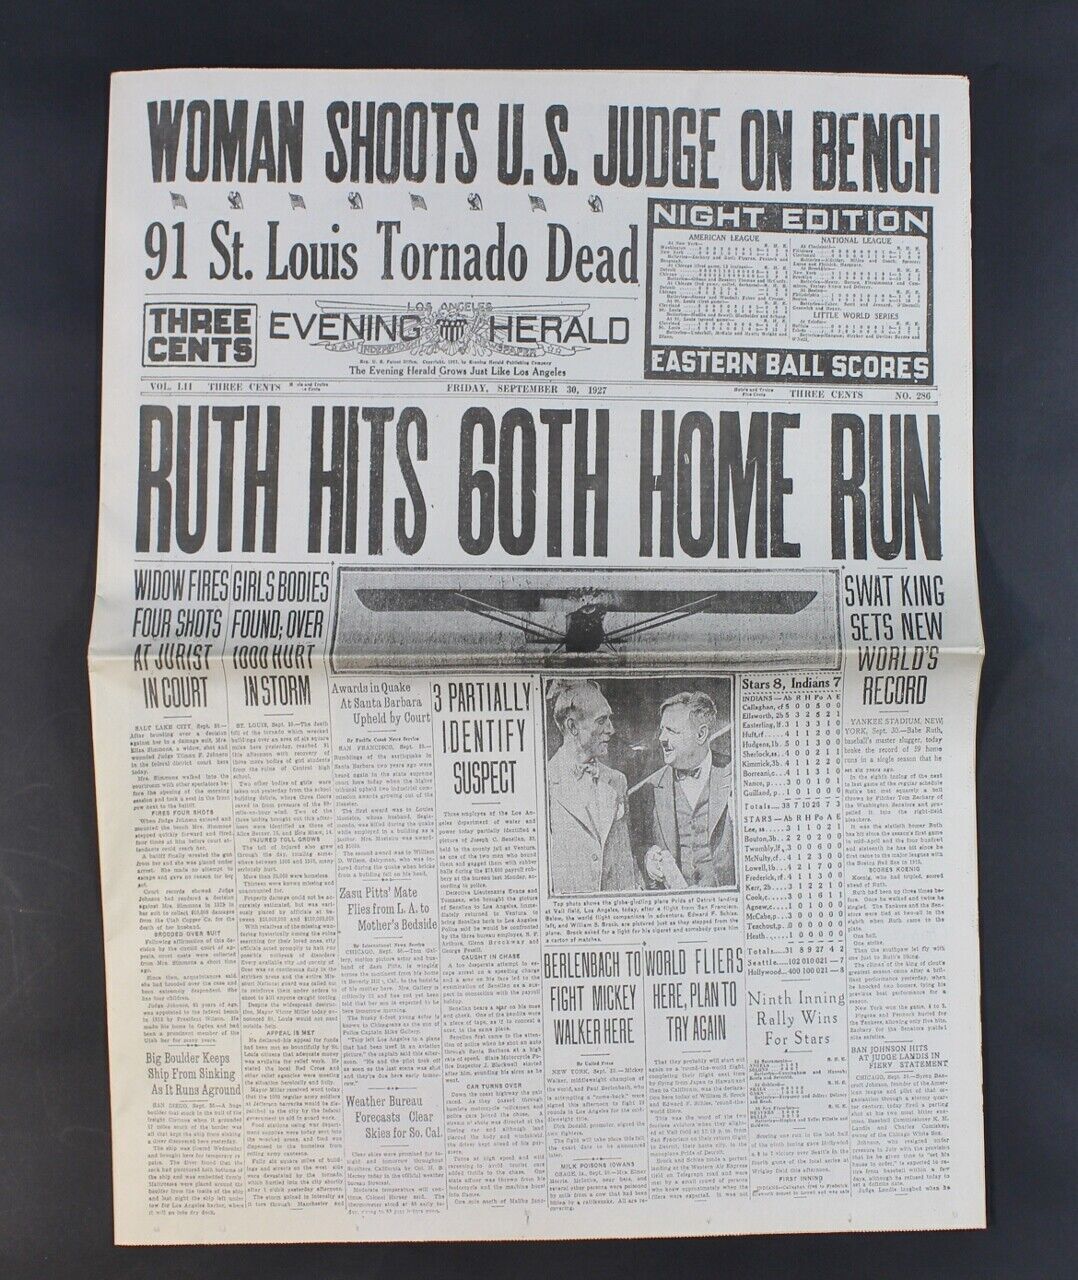 September 30 1927 Babe Ruth 60th Home Run Los Angeles 1920\'s Vintage Newspaper